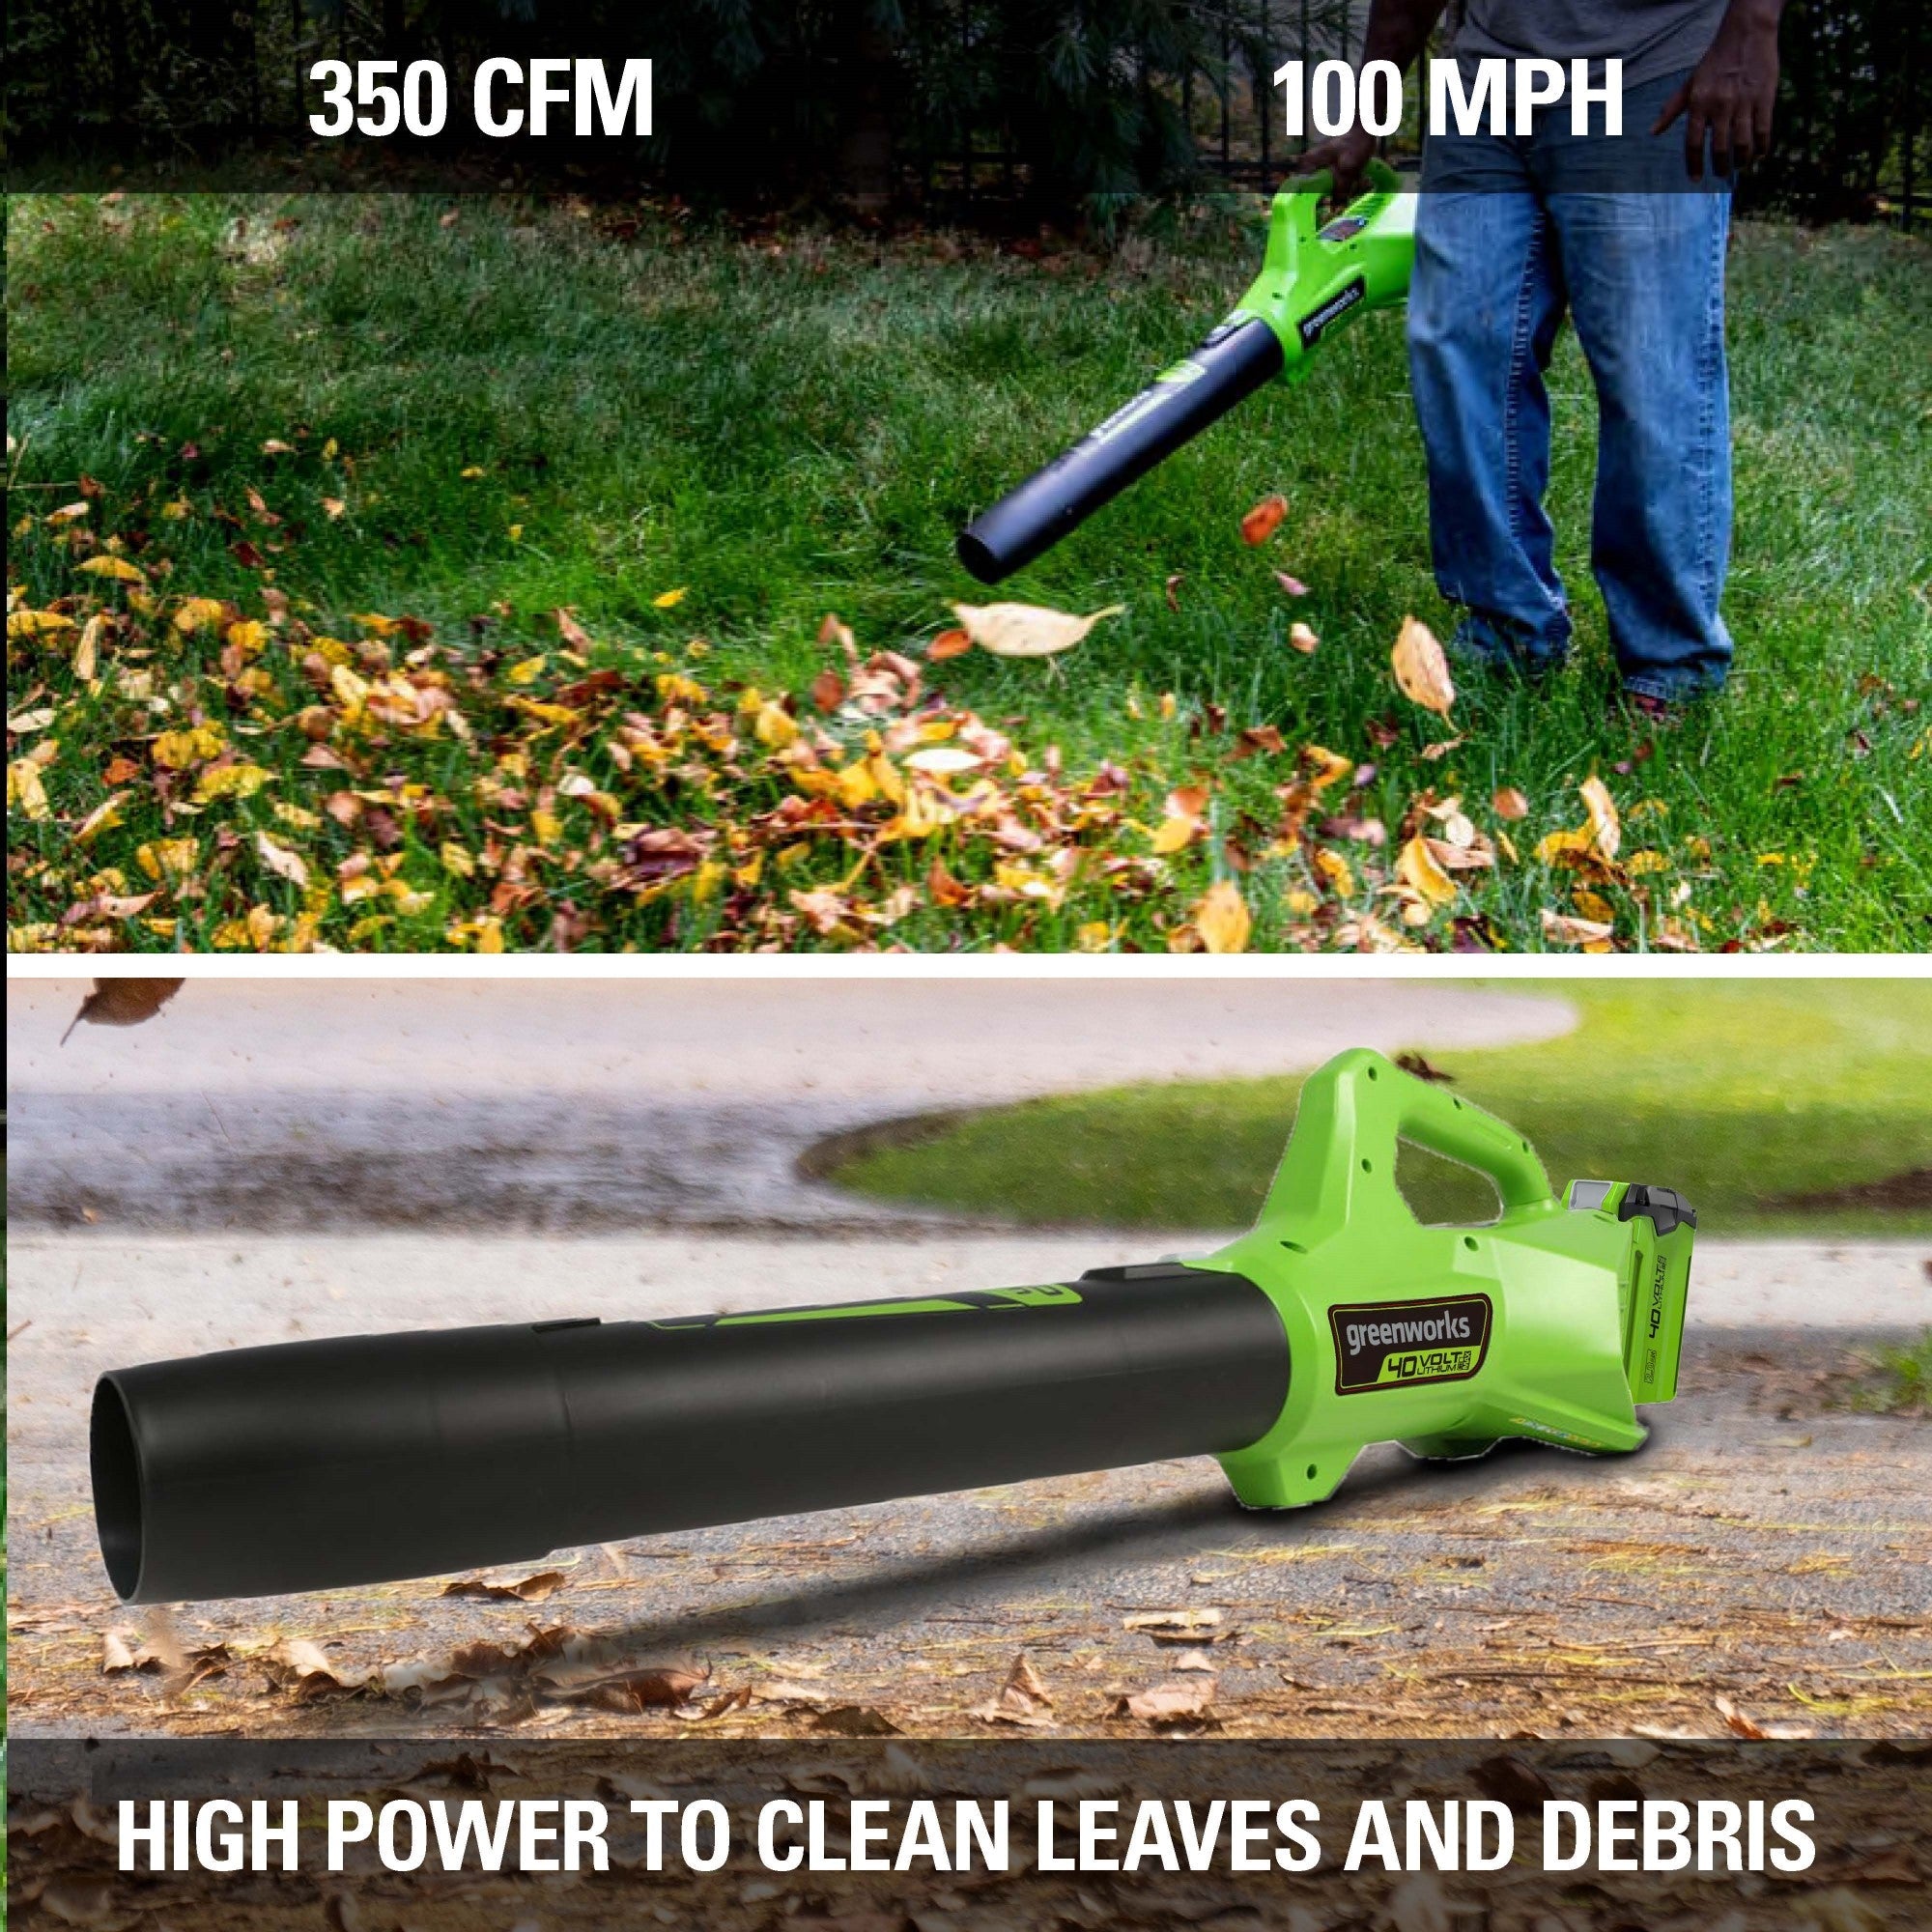 40V 20" Cordless Battery Push Lawn Mower, 13" String Trimmer & 350 CFM Leaf Blowerw/ (1)4.0Ah Battery,(1)2.0Ah Battery & (2)Chargers